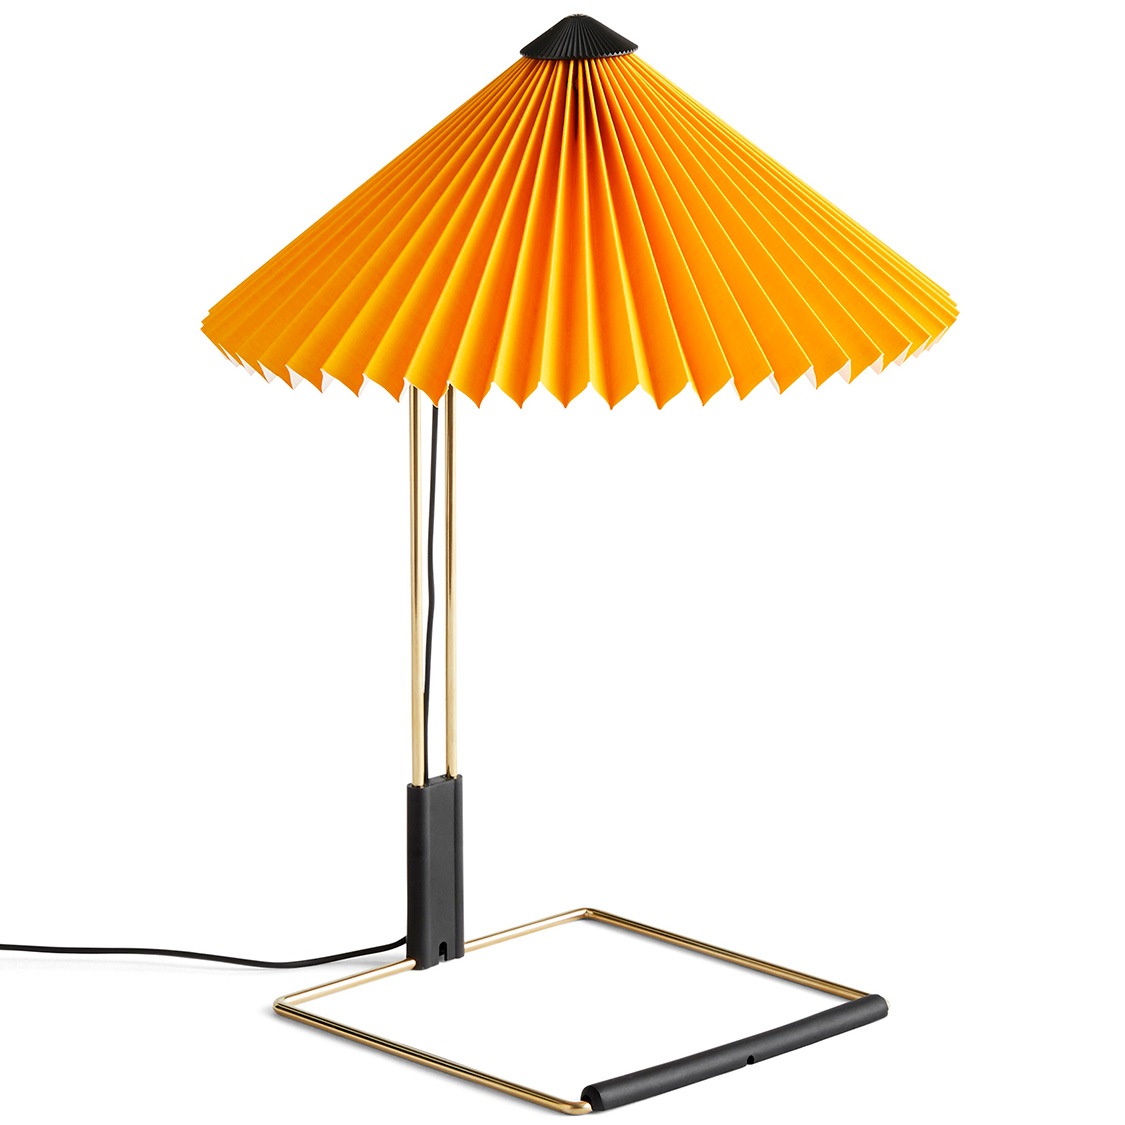 Matin Table Lamp 300 mm, Polished Brass / Bright Yellow